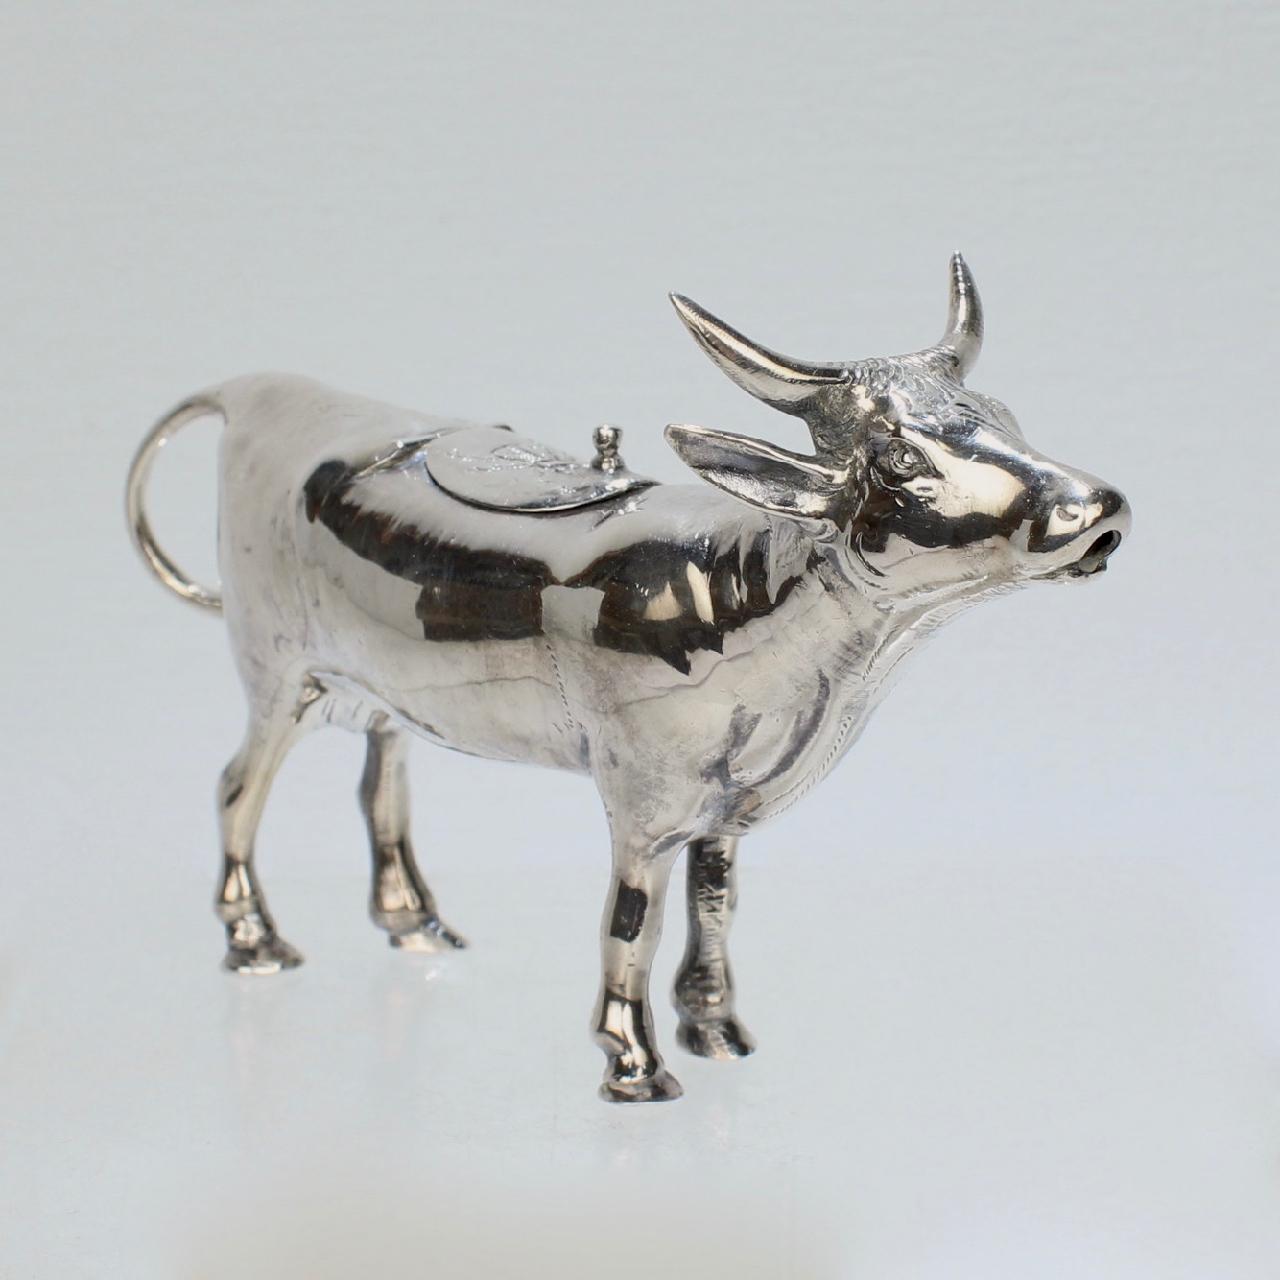 A very fine figural sterling silver creamer or milk pot by Israel Freeman & Son.

In the form of a cow with a loop 'tail' handle, hinged lid to the back, and spout at the mouth.

A truly whimsical creamer perfect for any breakfast